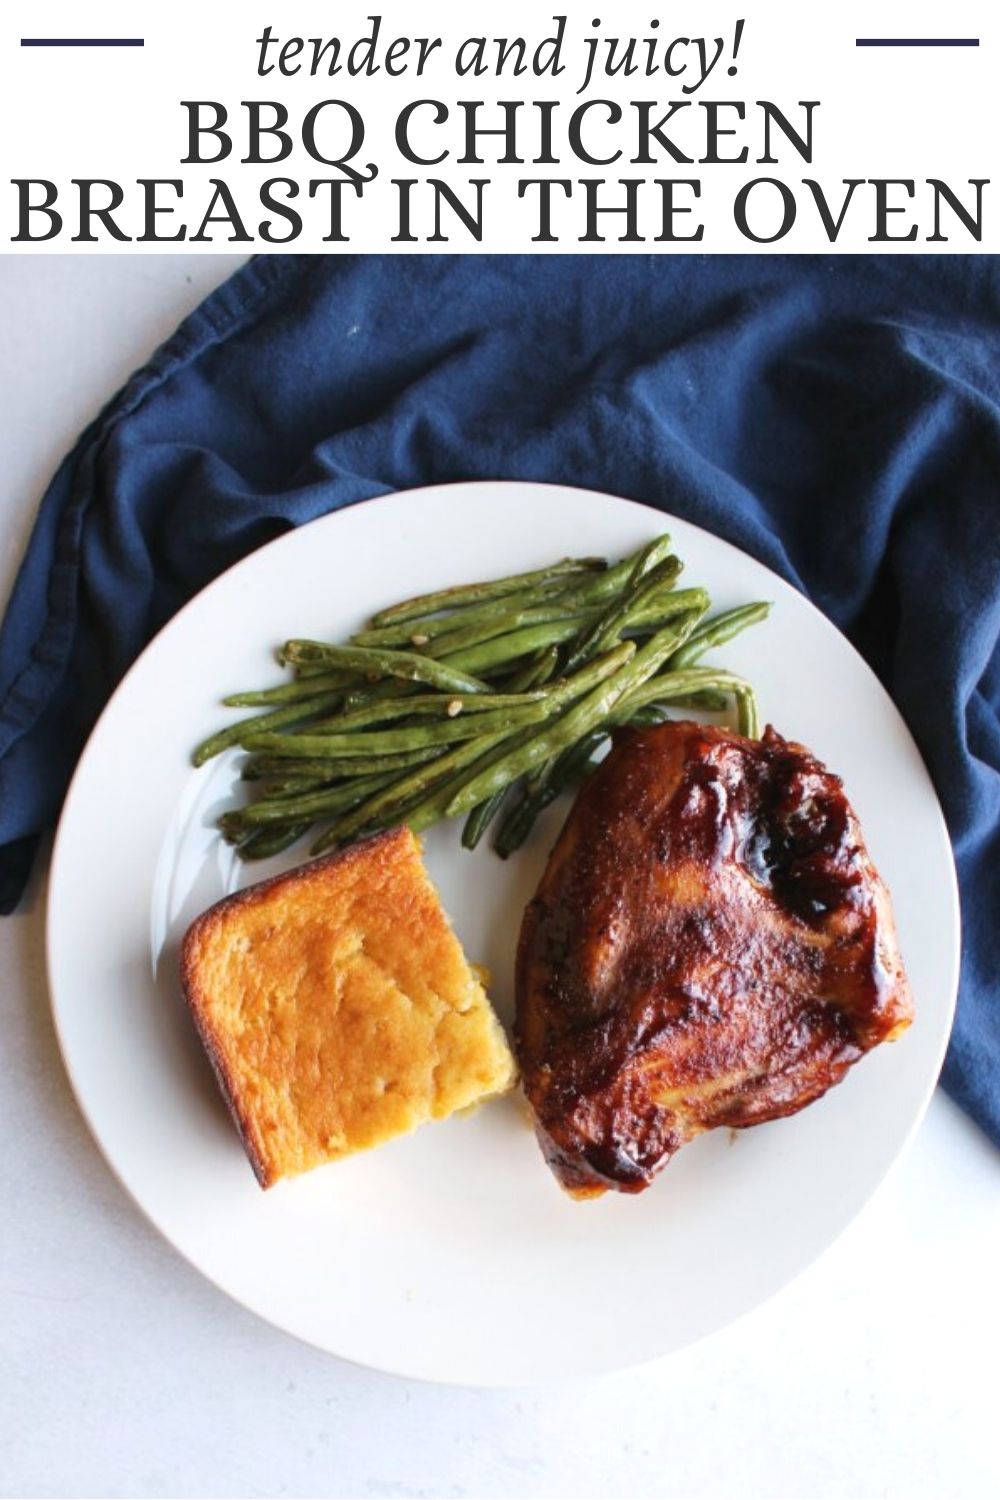 Sometimes you get a hankering for BBQ chicken but standing over the grill isn’t possible. That’s when you break out this recipe for baked BBQ chicken, it is the best way to do it indoors!